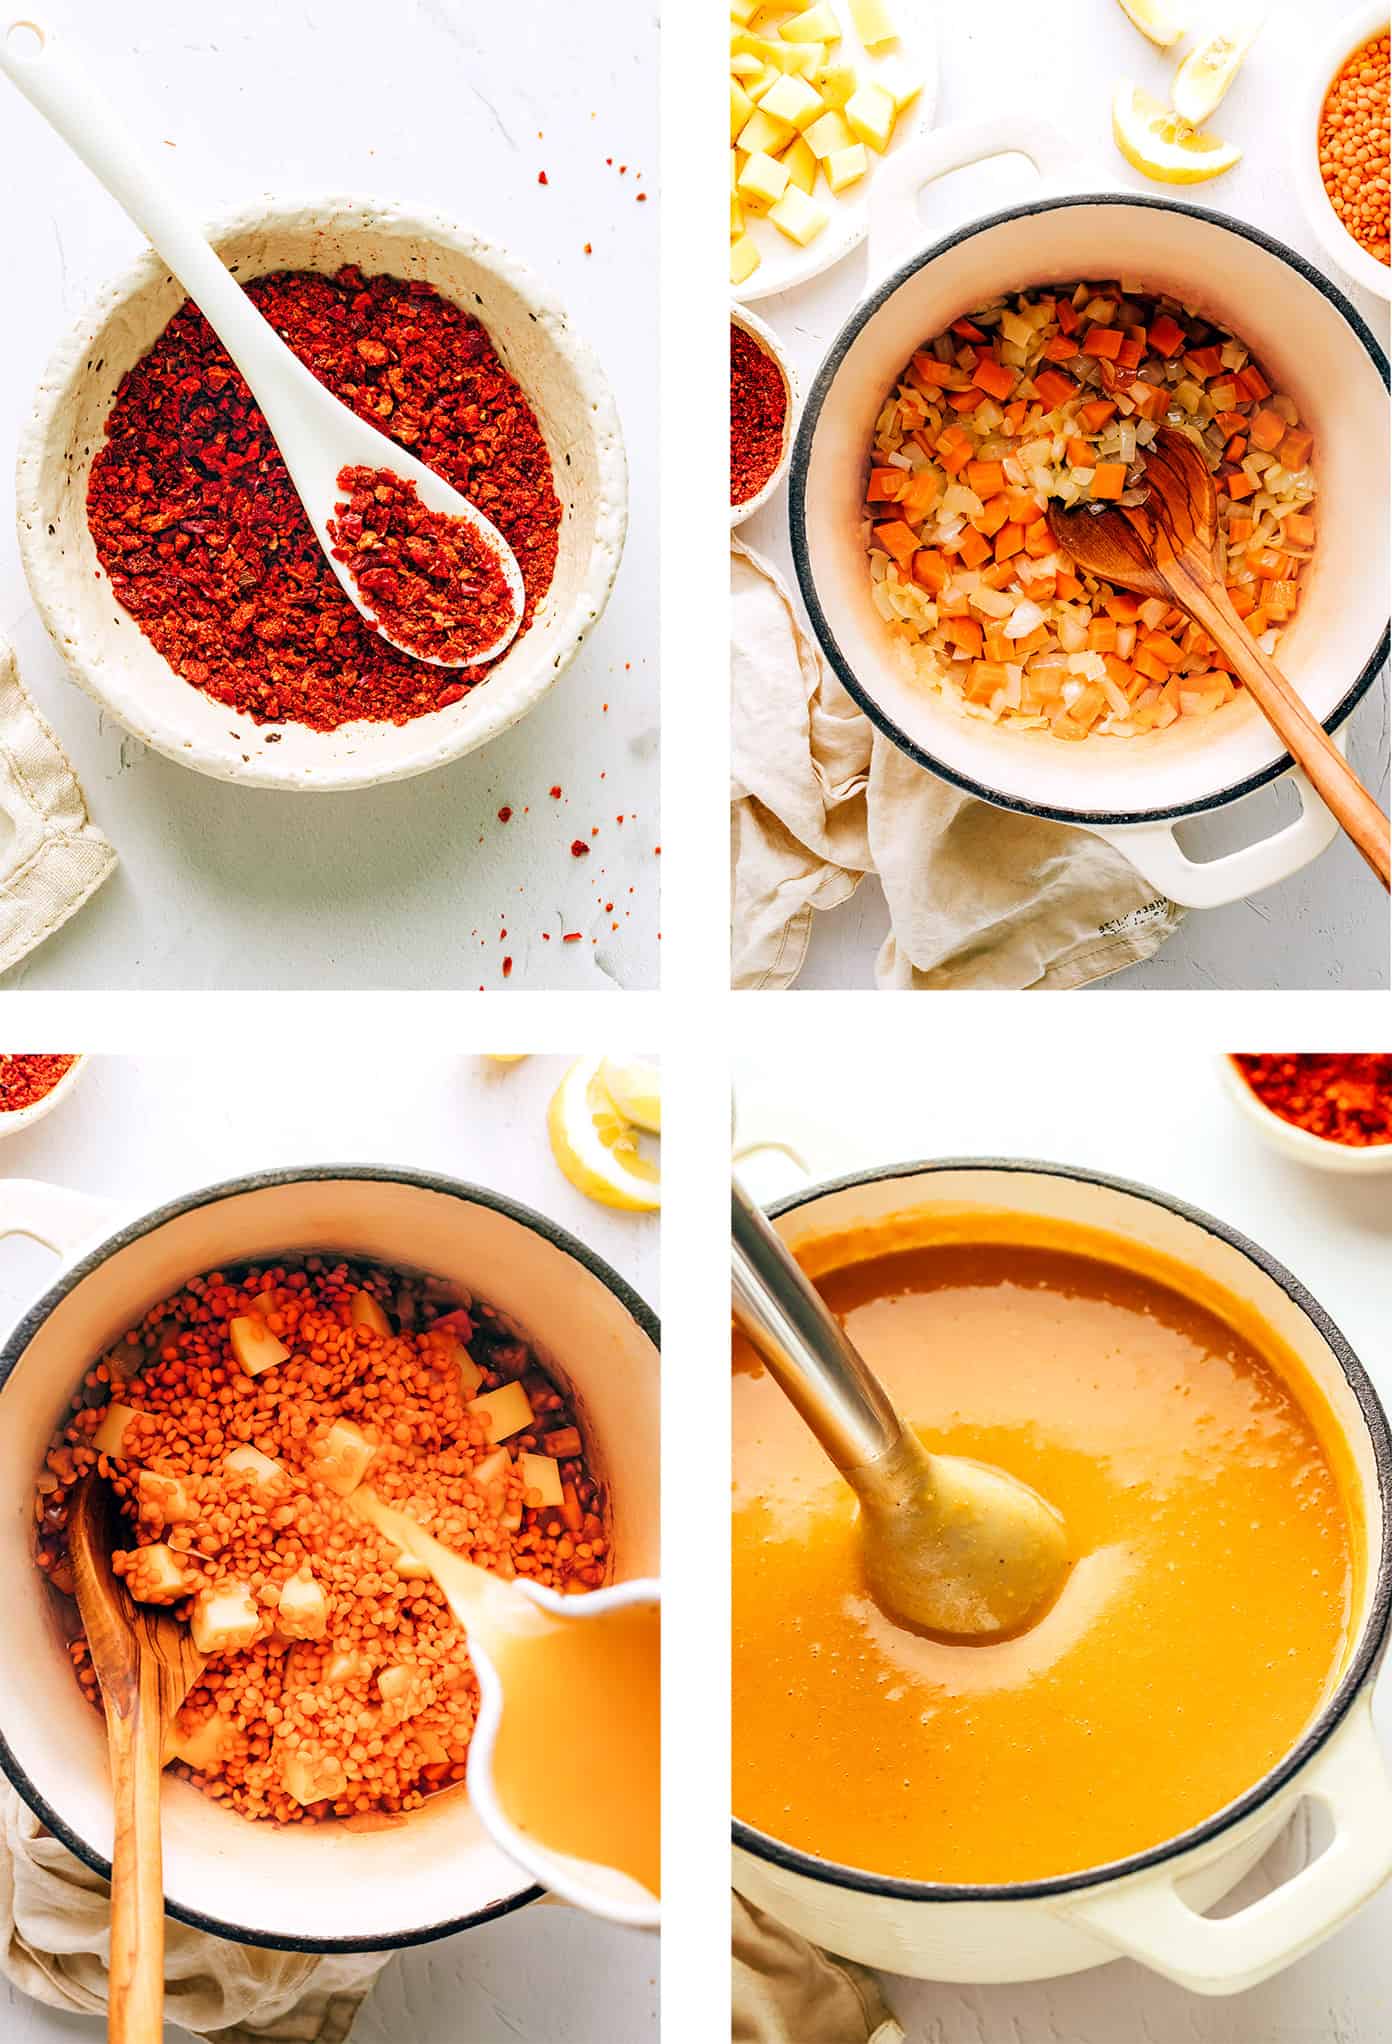 Step by step photos detailing how to make Turkish lentil soup